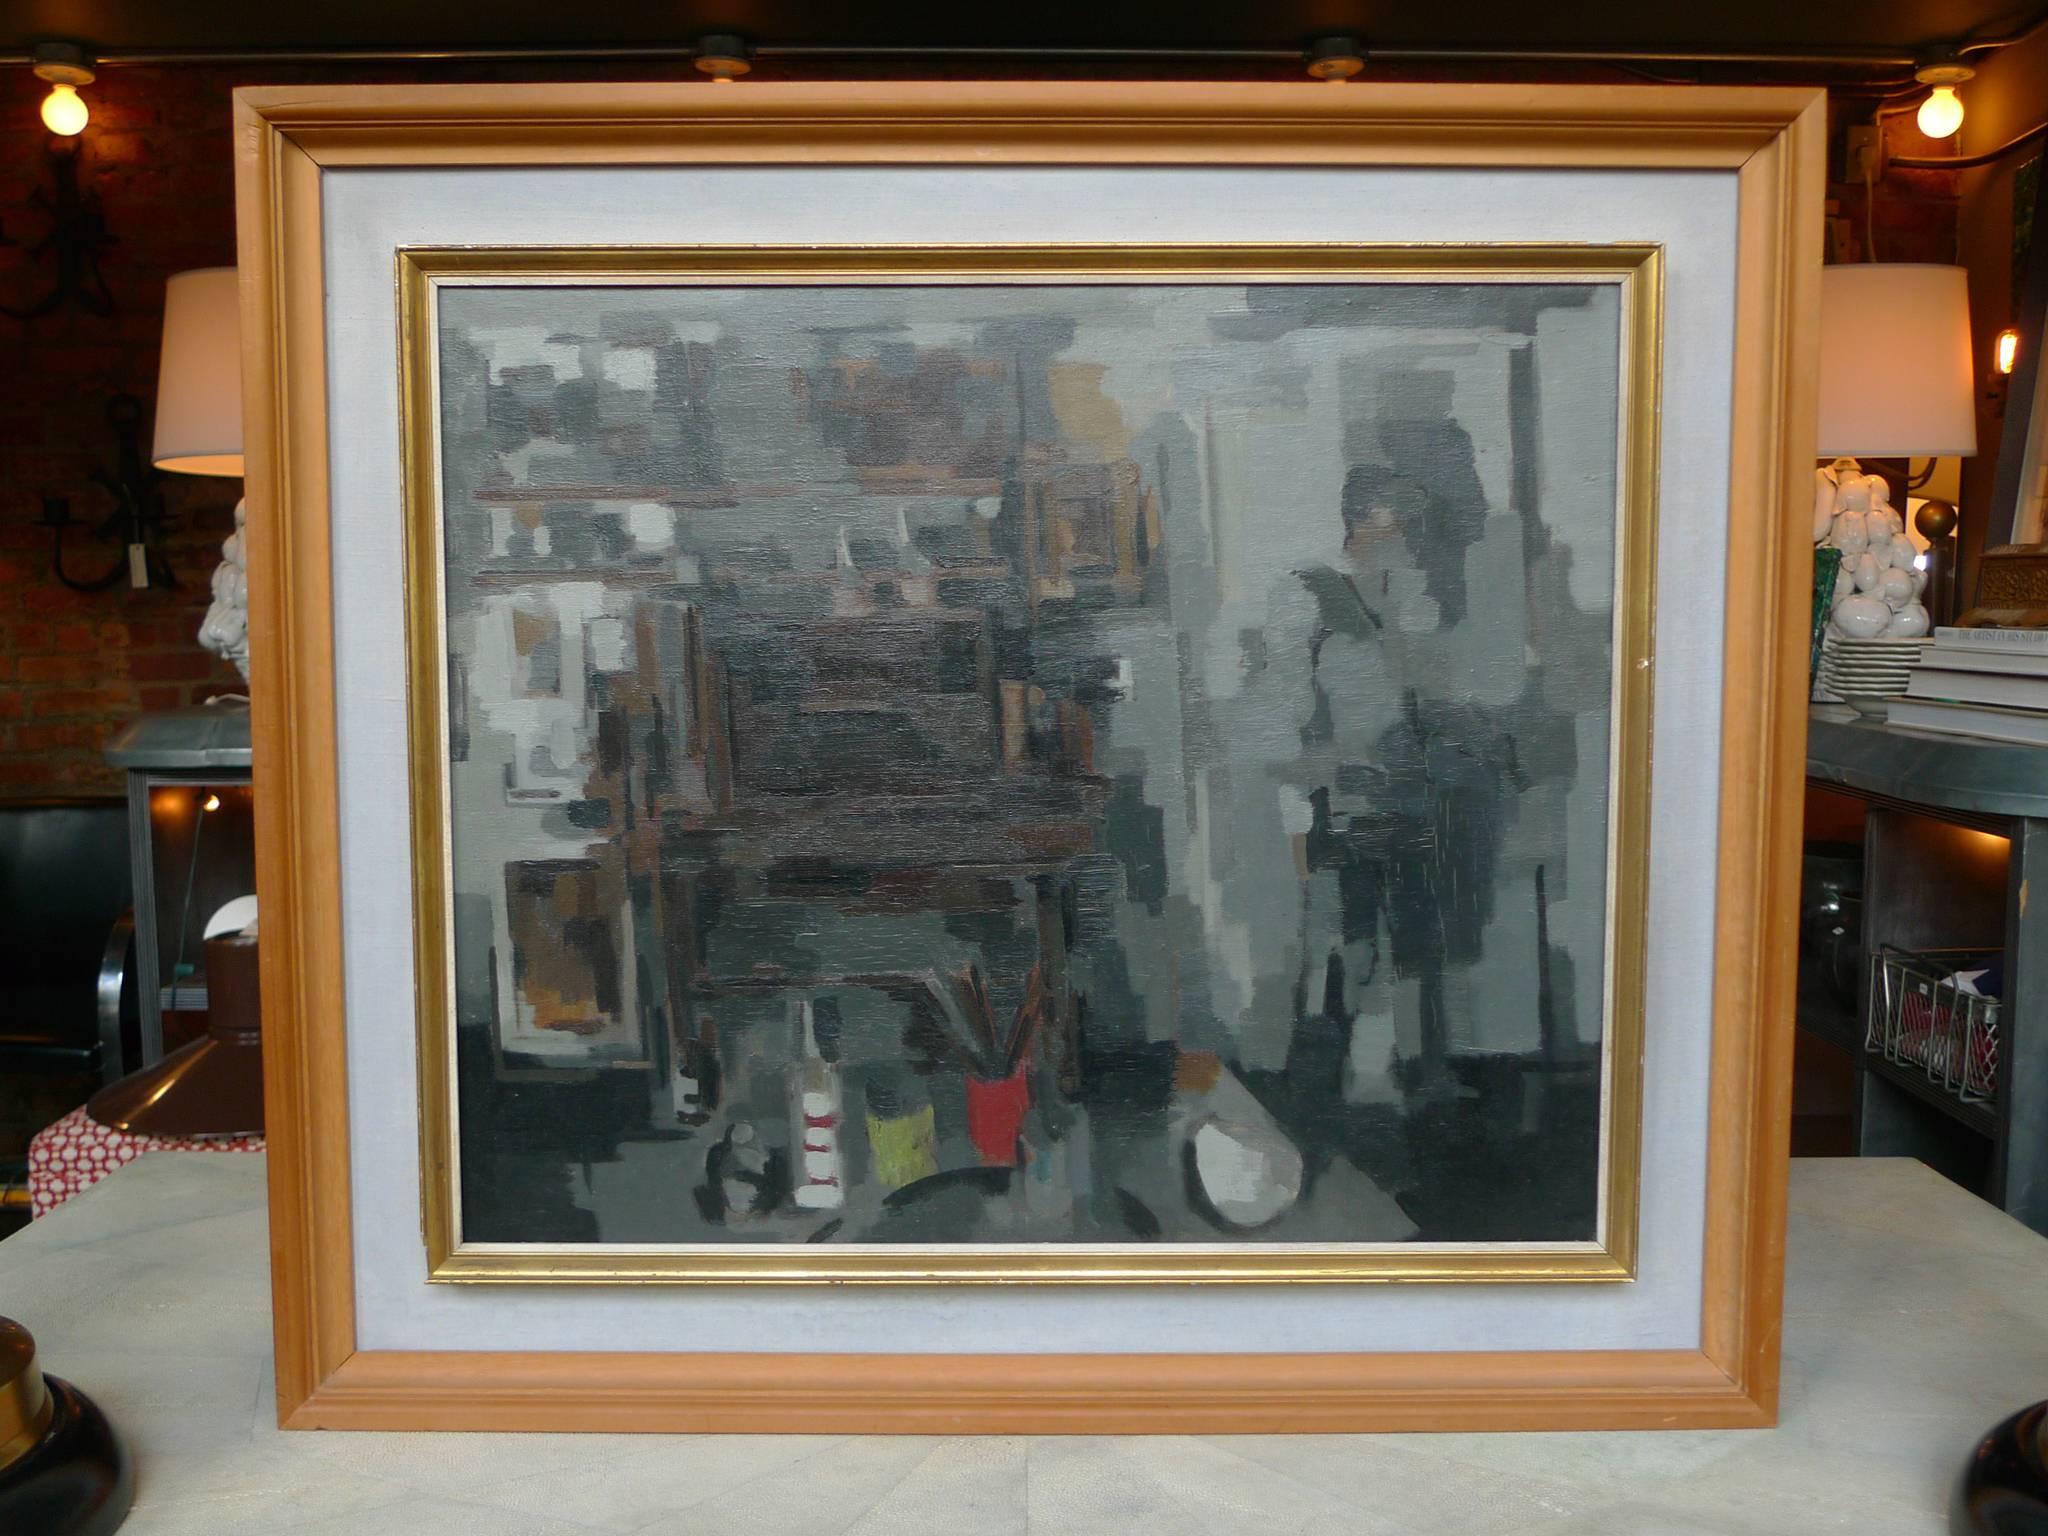 This compelling painting by Donald Buley is dated circa 1960. Buley's 